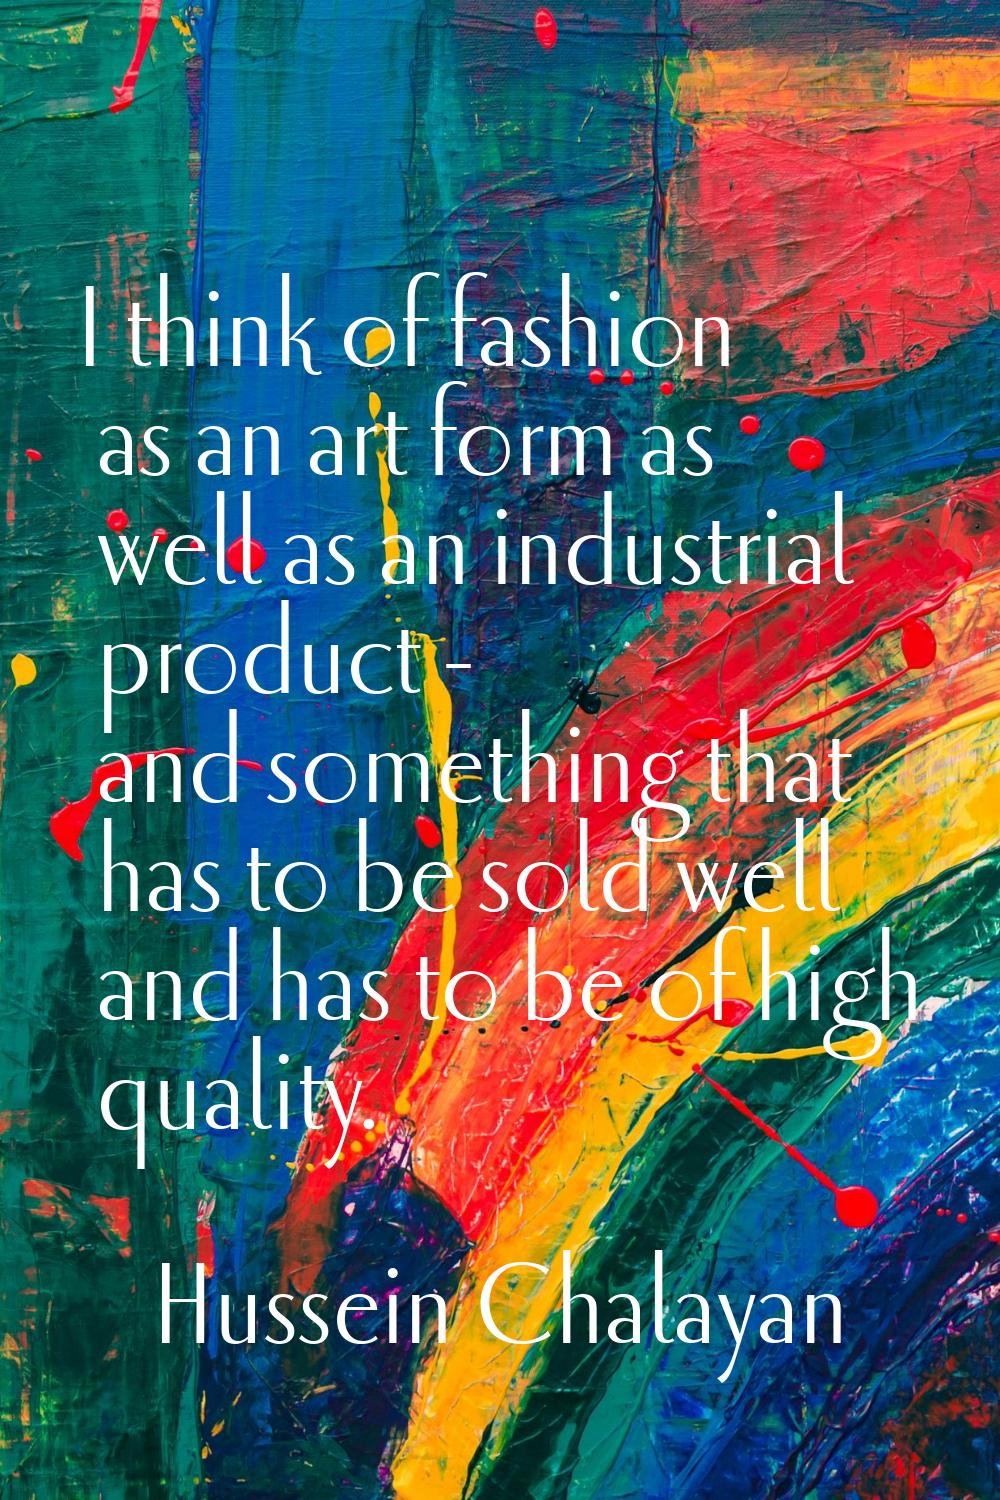 I think of fashion as an art form as well as an industrial product - and something that has to be s